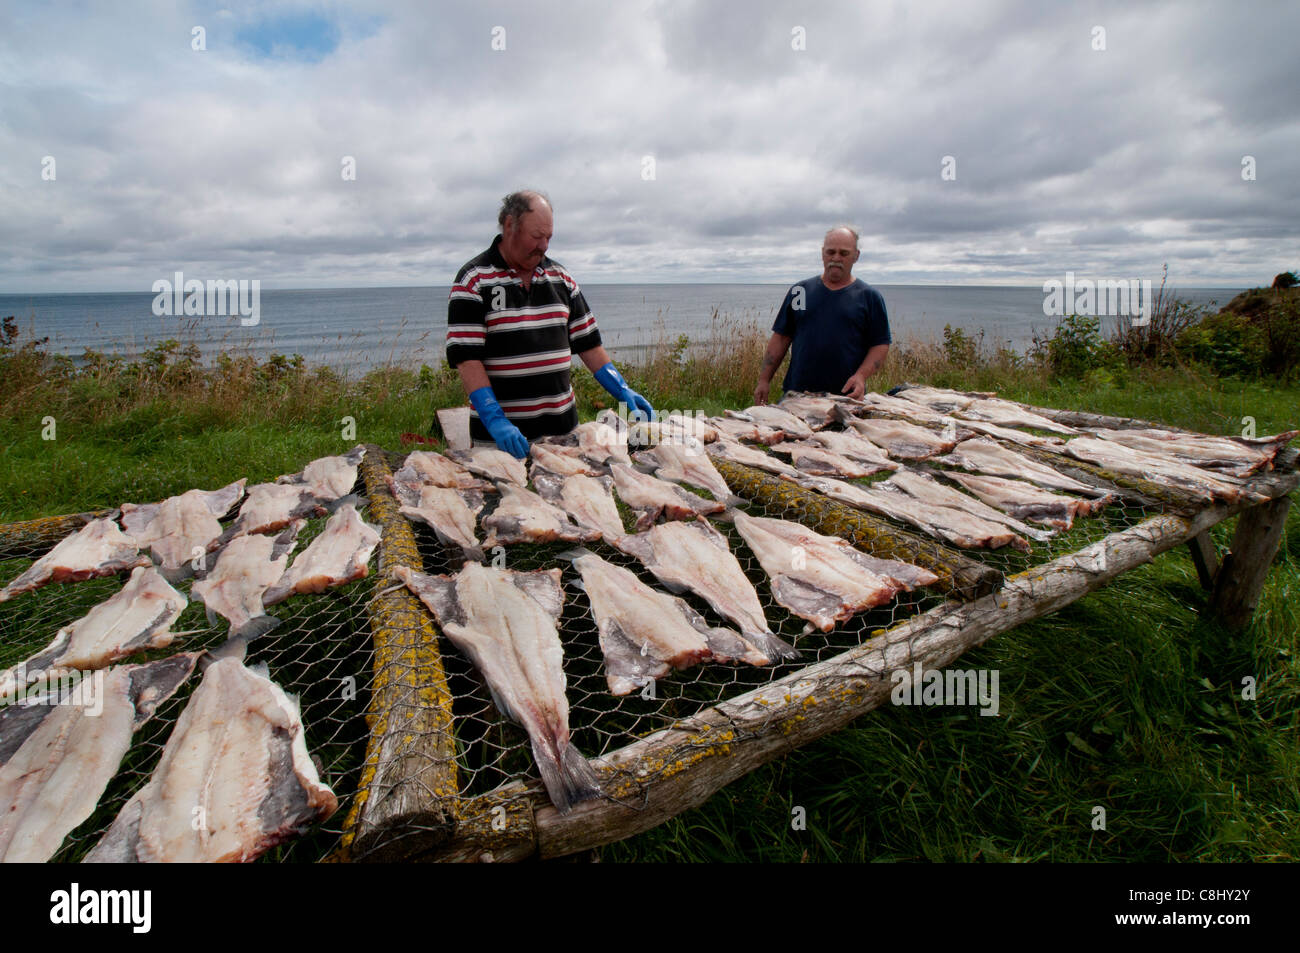 Fishermen Robert Lambert (left) and Robert Lévesque prpare cod for drying in the sun at Sainte-de-Therese-de-Gaspe in Quebec. Stock Photo